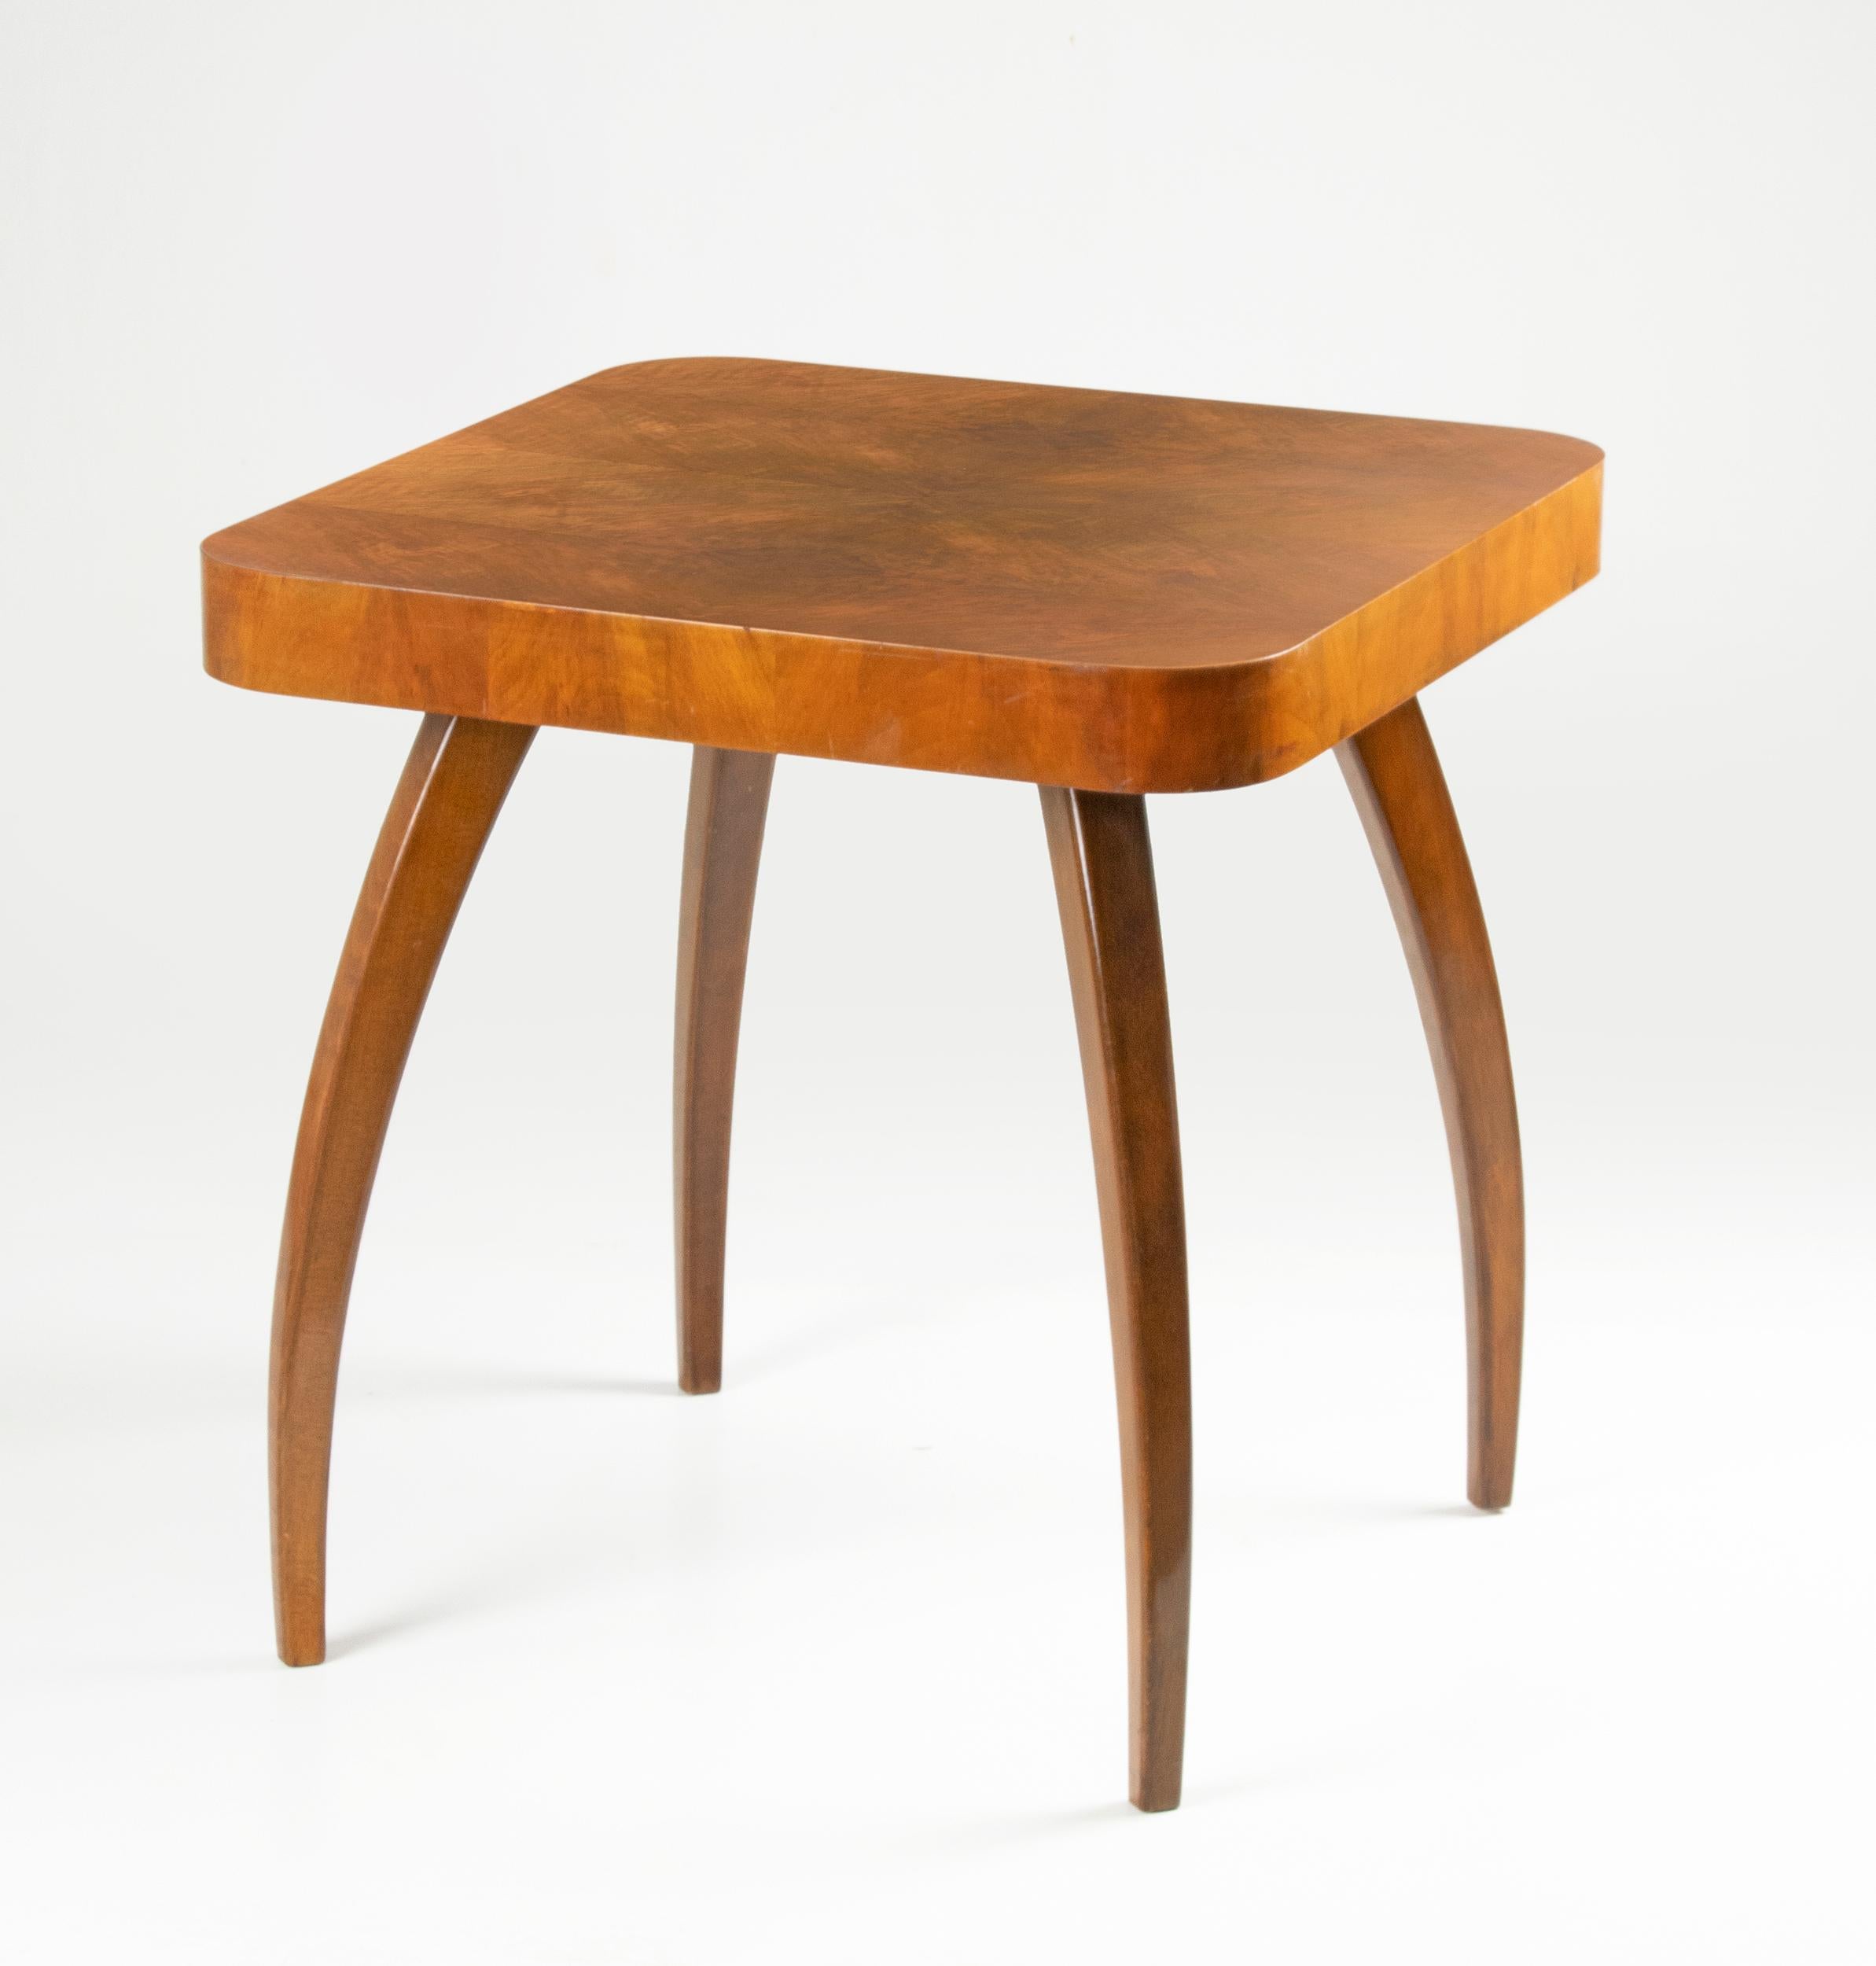 A design classic side table by Czech designer and architect Jindrich Halabala ( 1903-1978 ) for UP Zavody. This Art Deco style side table has a square top with rounded corners and four stylised bentwood spider legs. The table is made from beechwood